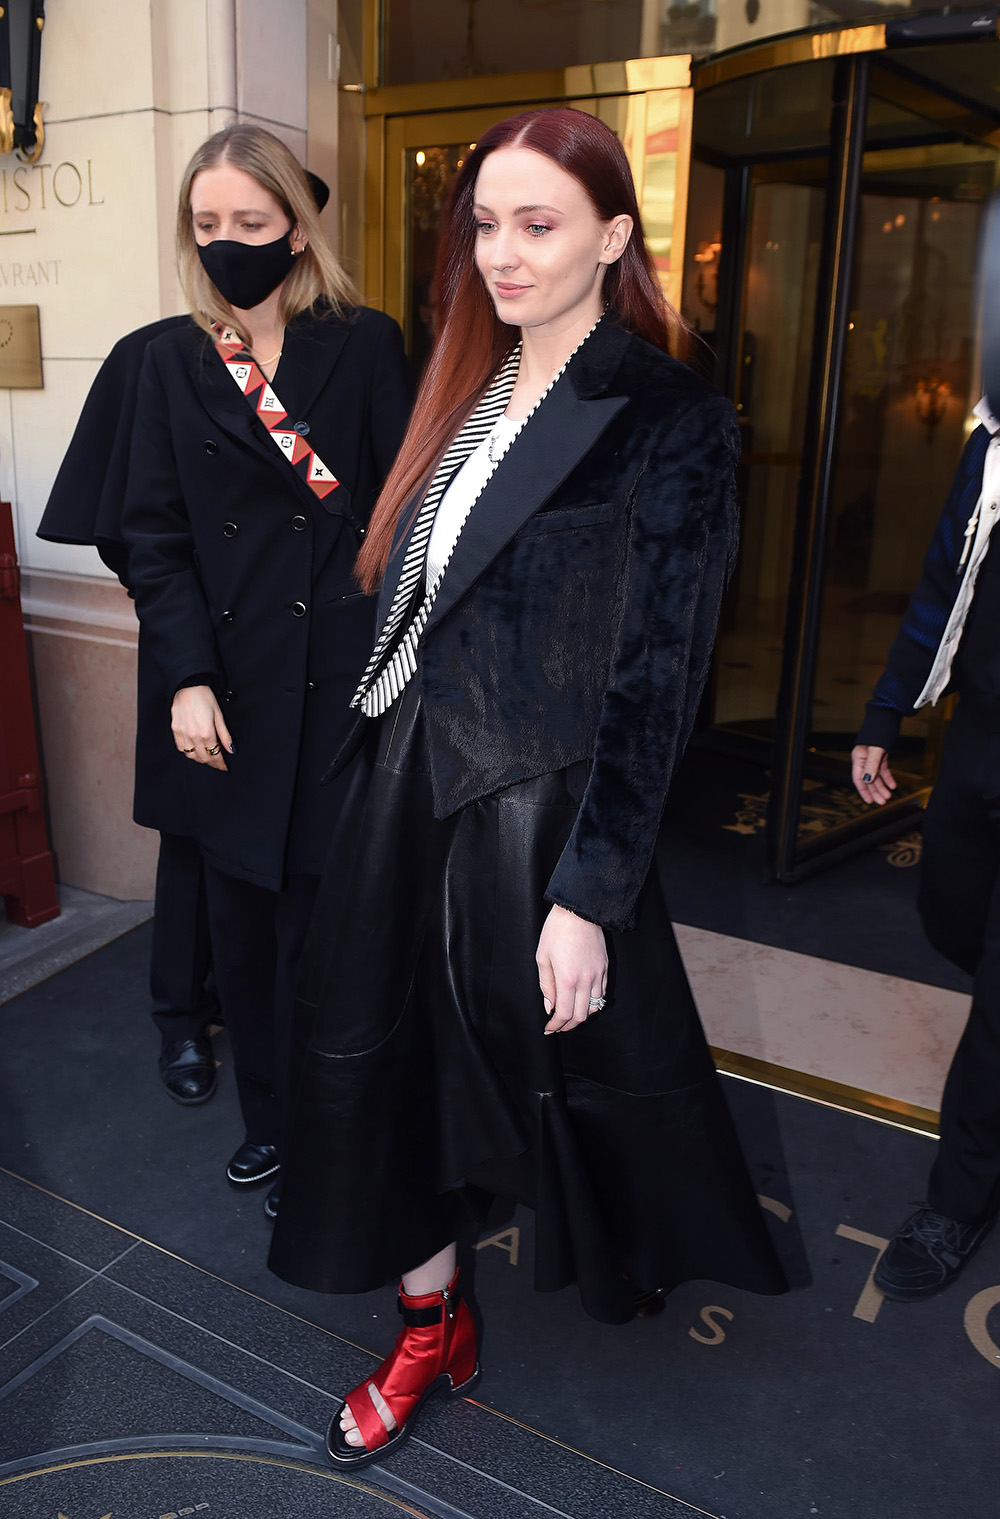 Is Game of Thrones Star Sophie Turner Louis Vuitton's New Muse?